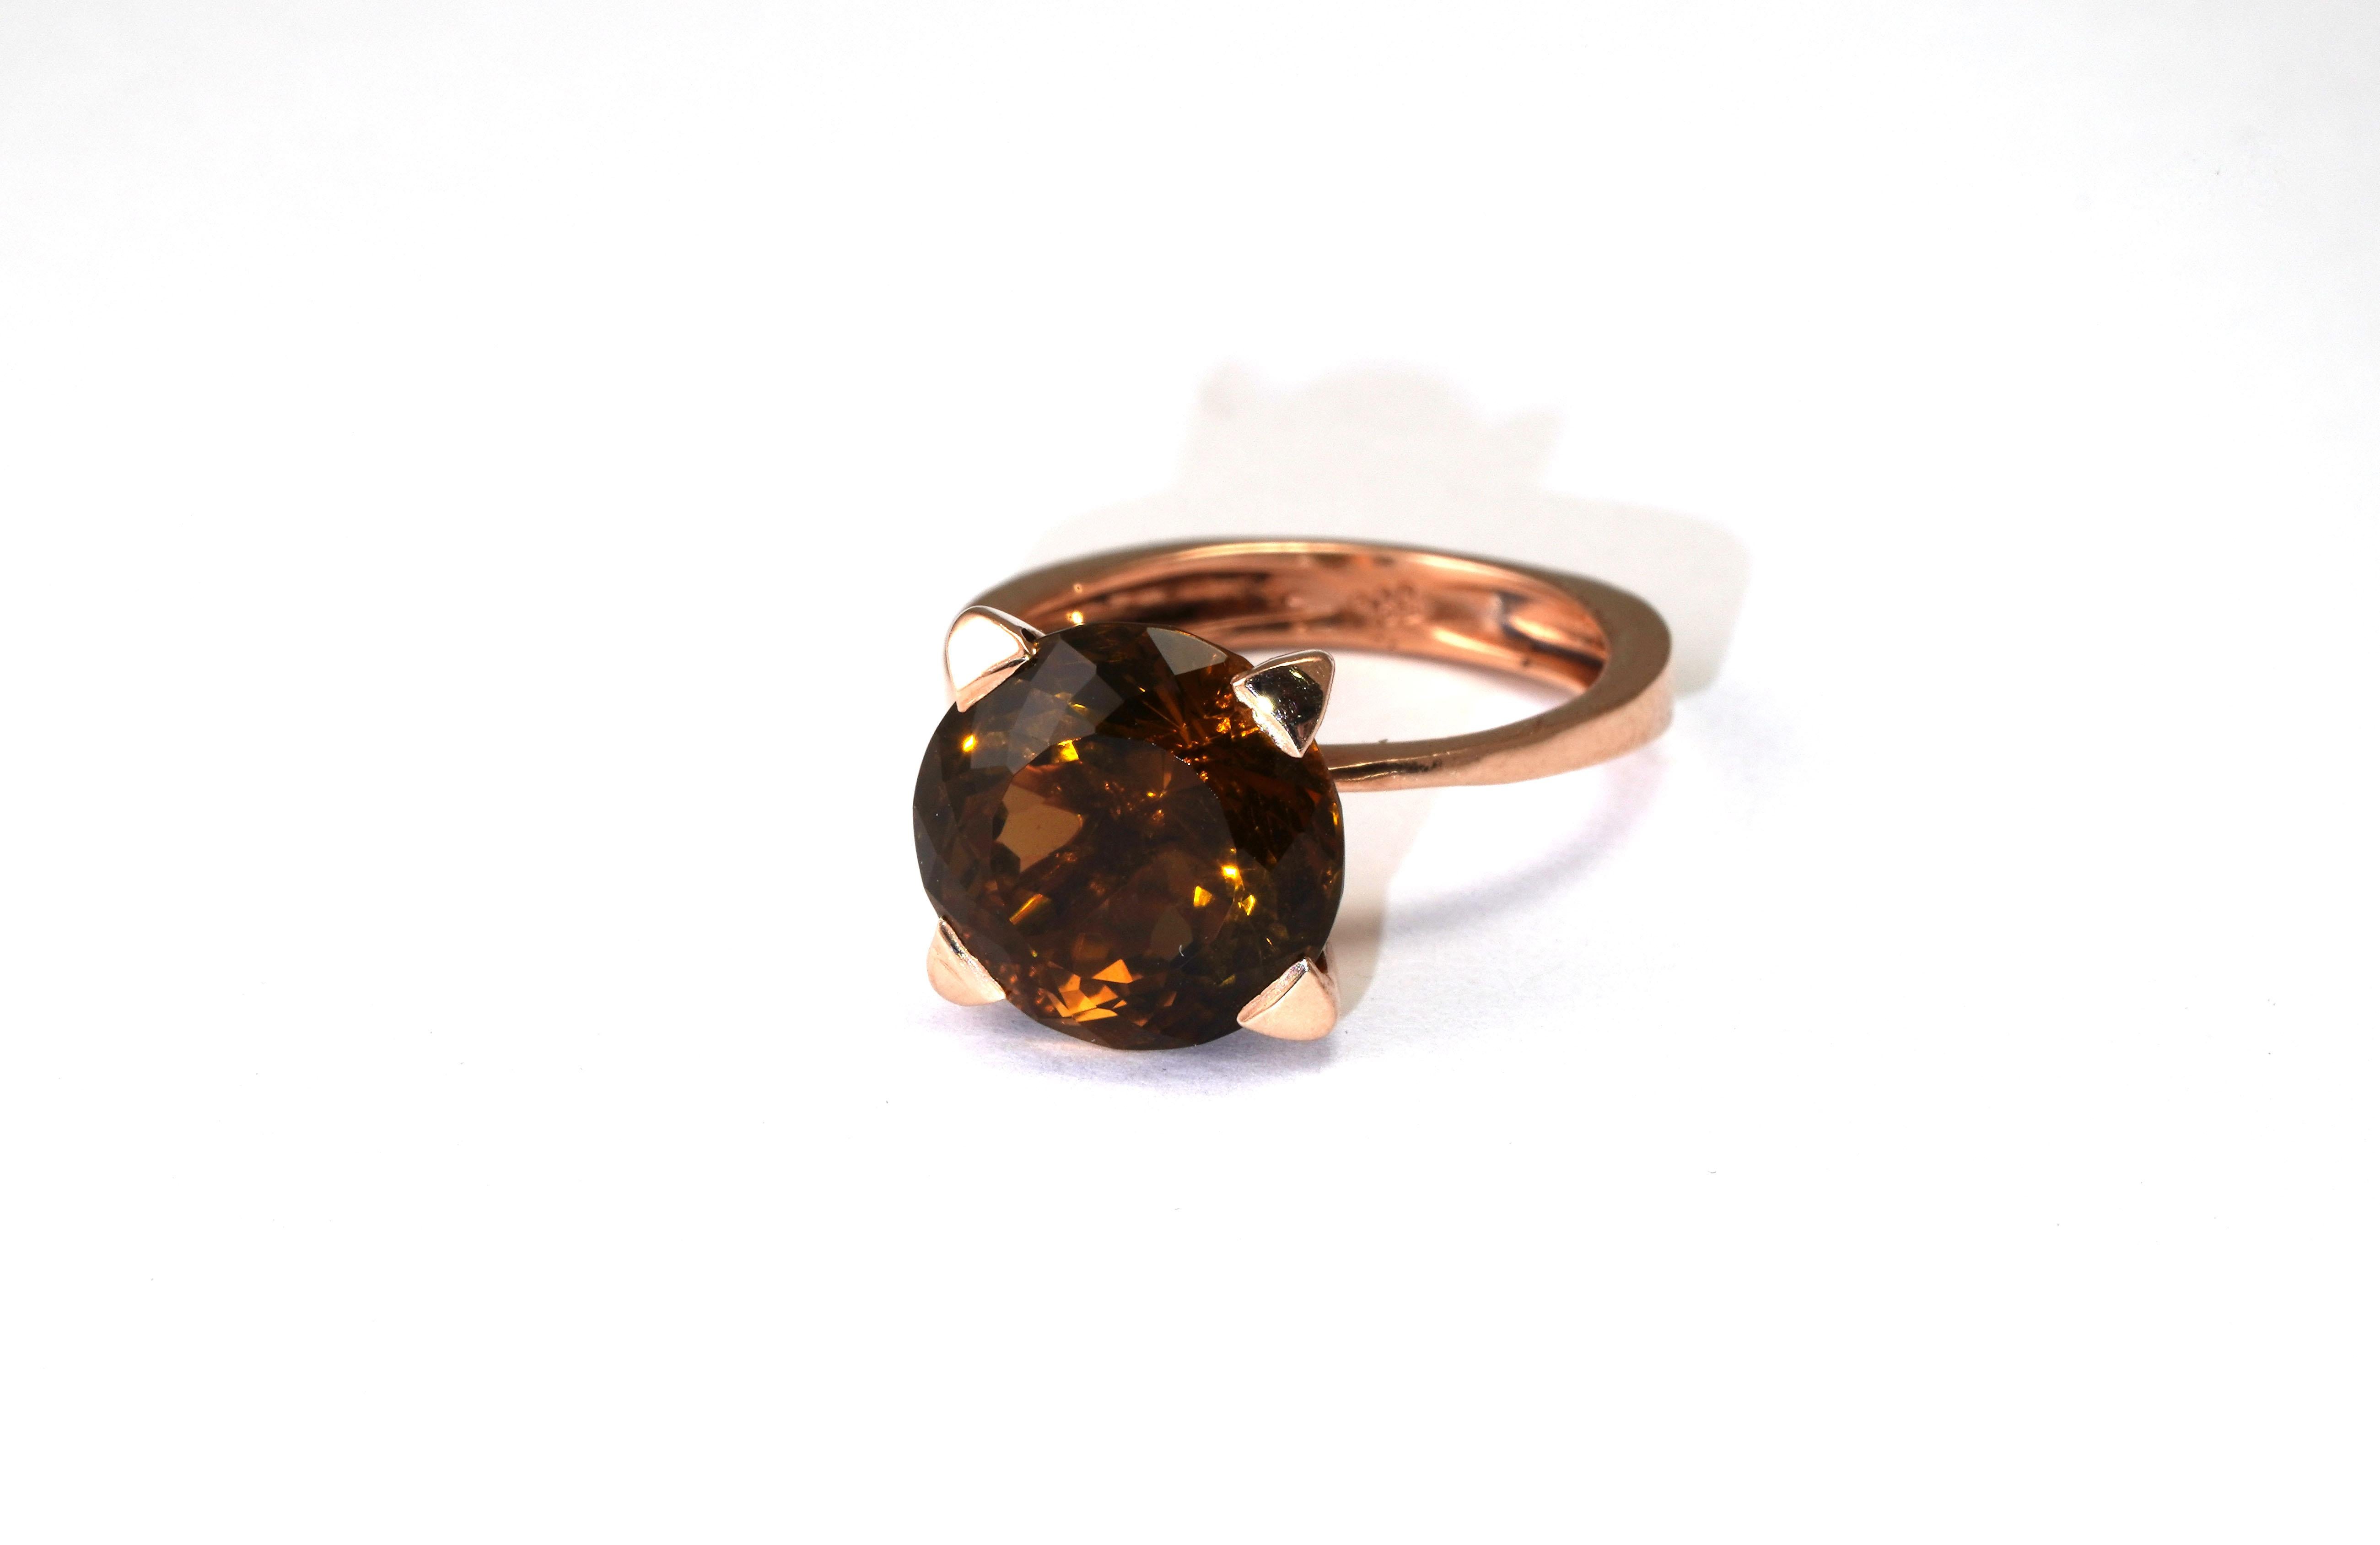 14 kt Gold ring with Cognac Citrine
Gold color: Rose
Ring size: 5 US
Total weight: 3.13 grams

Set with:
- Cognac Citrine
Cut: Round
Weight: 5.08 ct
Color: Cognac